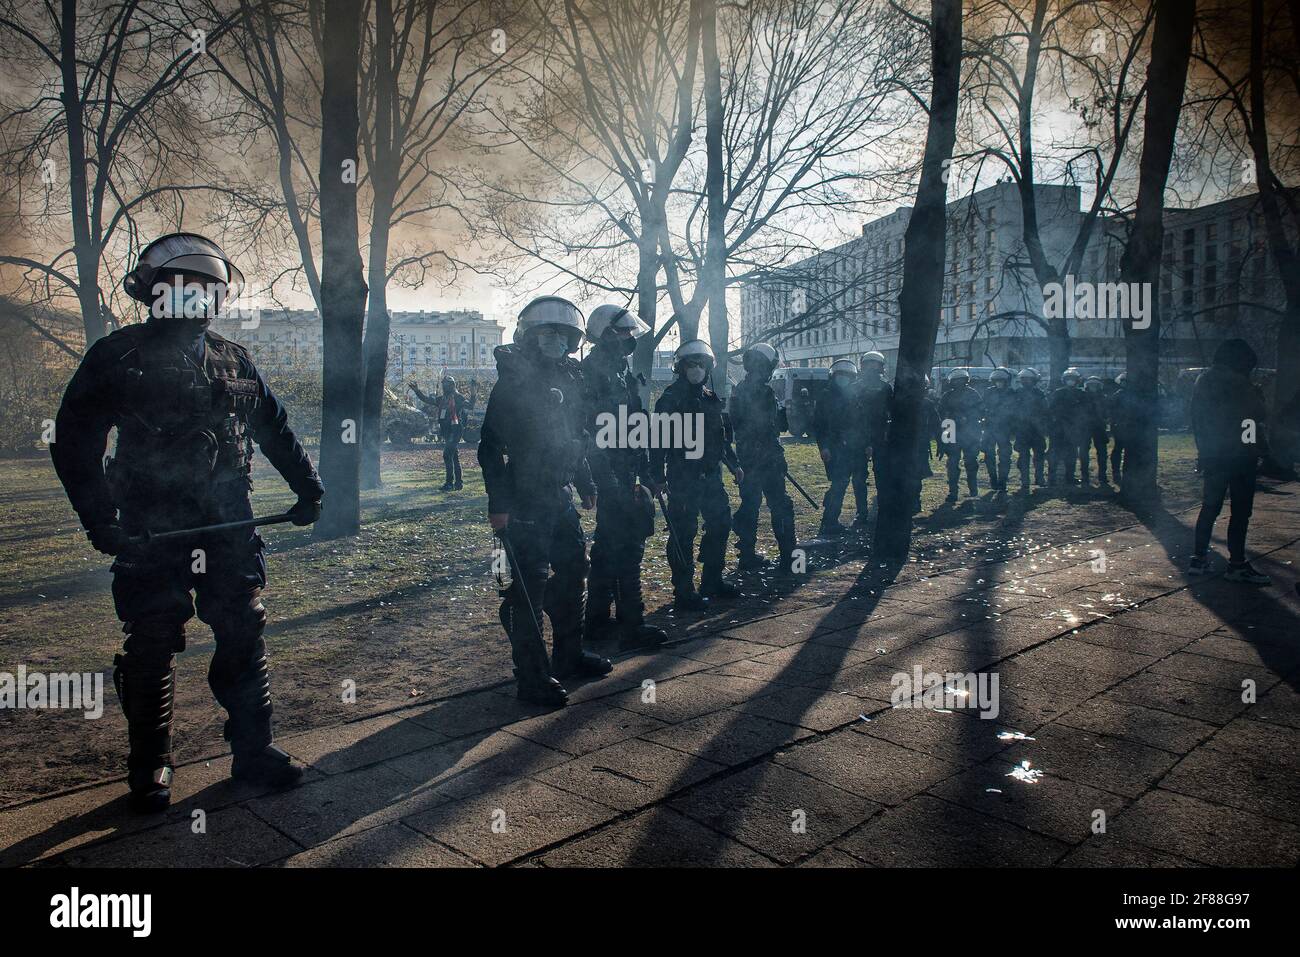 Warsaw, April 10, 2021:  Anti-riot policemen stand on guard  during the  11th anniversary celebration of the Smolensk plane crash and 81st anniversary Stock Photo